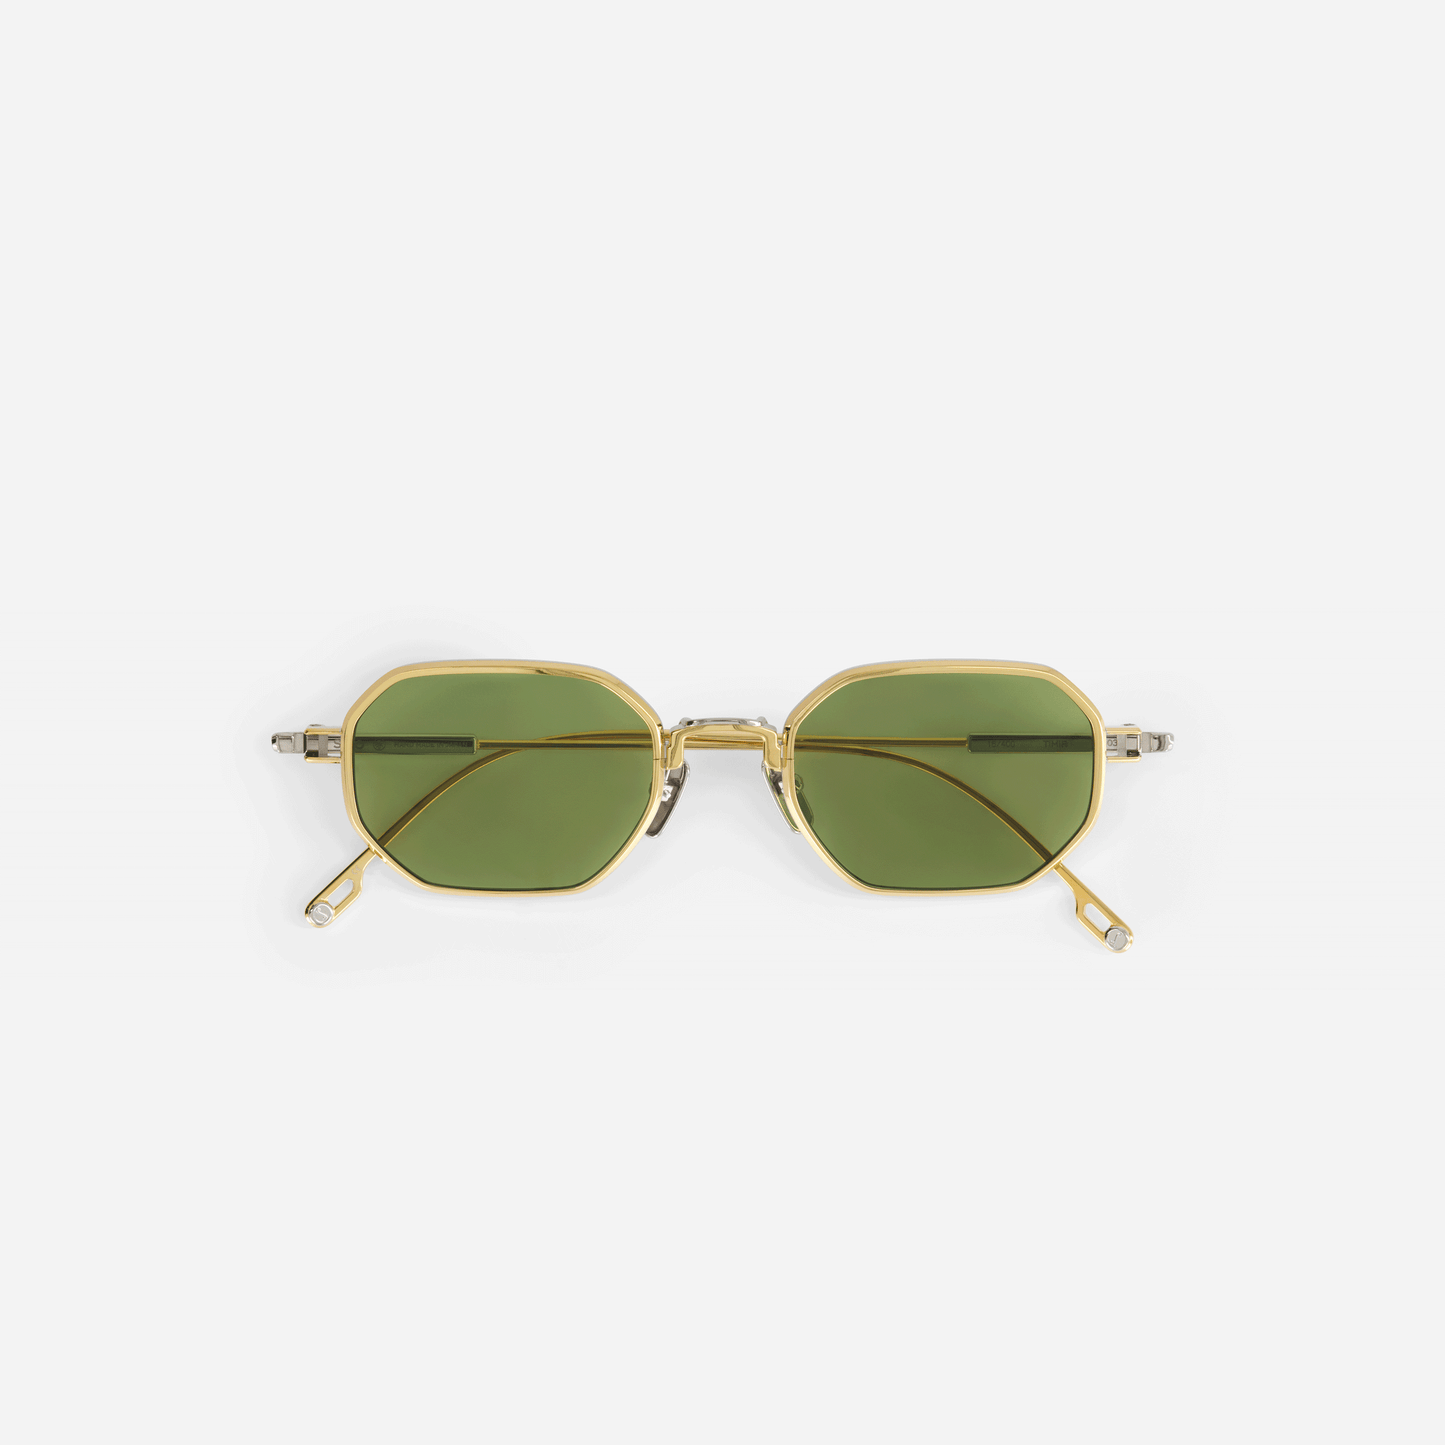 Timir S502 hexagonal glasses, meticulously crafted from pure Japanese titanium in the elegant Yellow Gold and Platinum colors, featuring captivating green lenses.